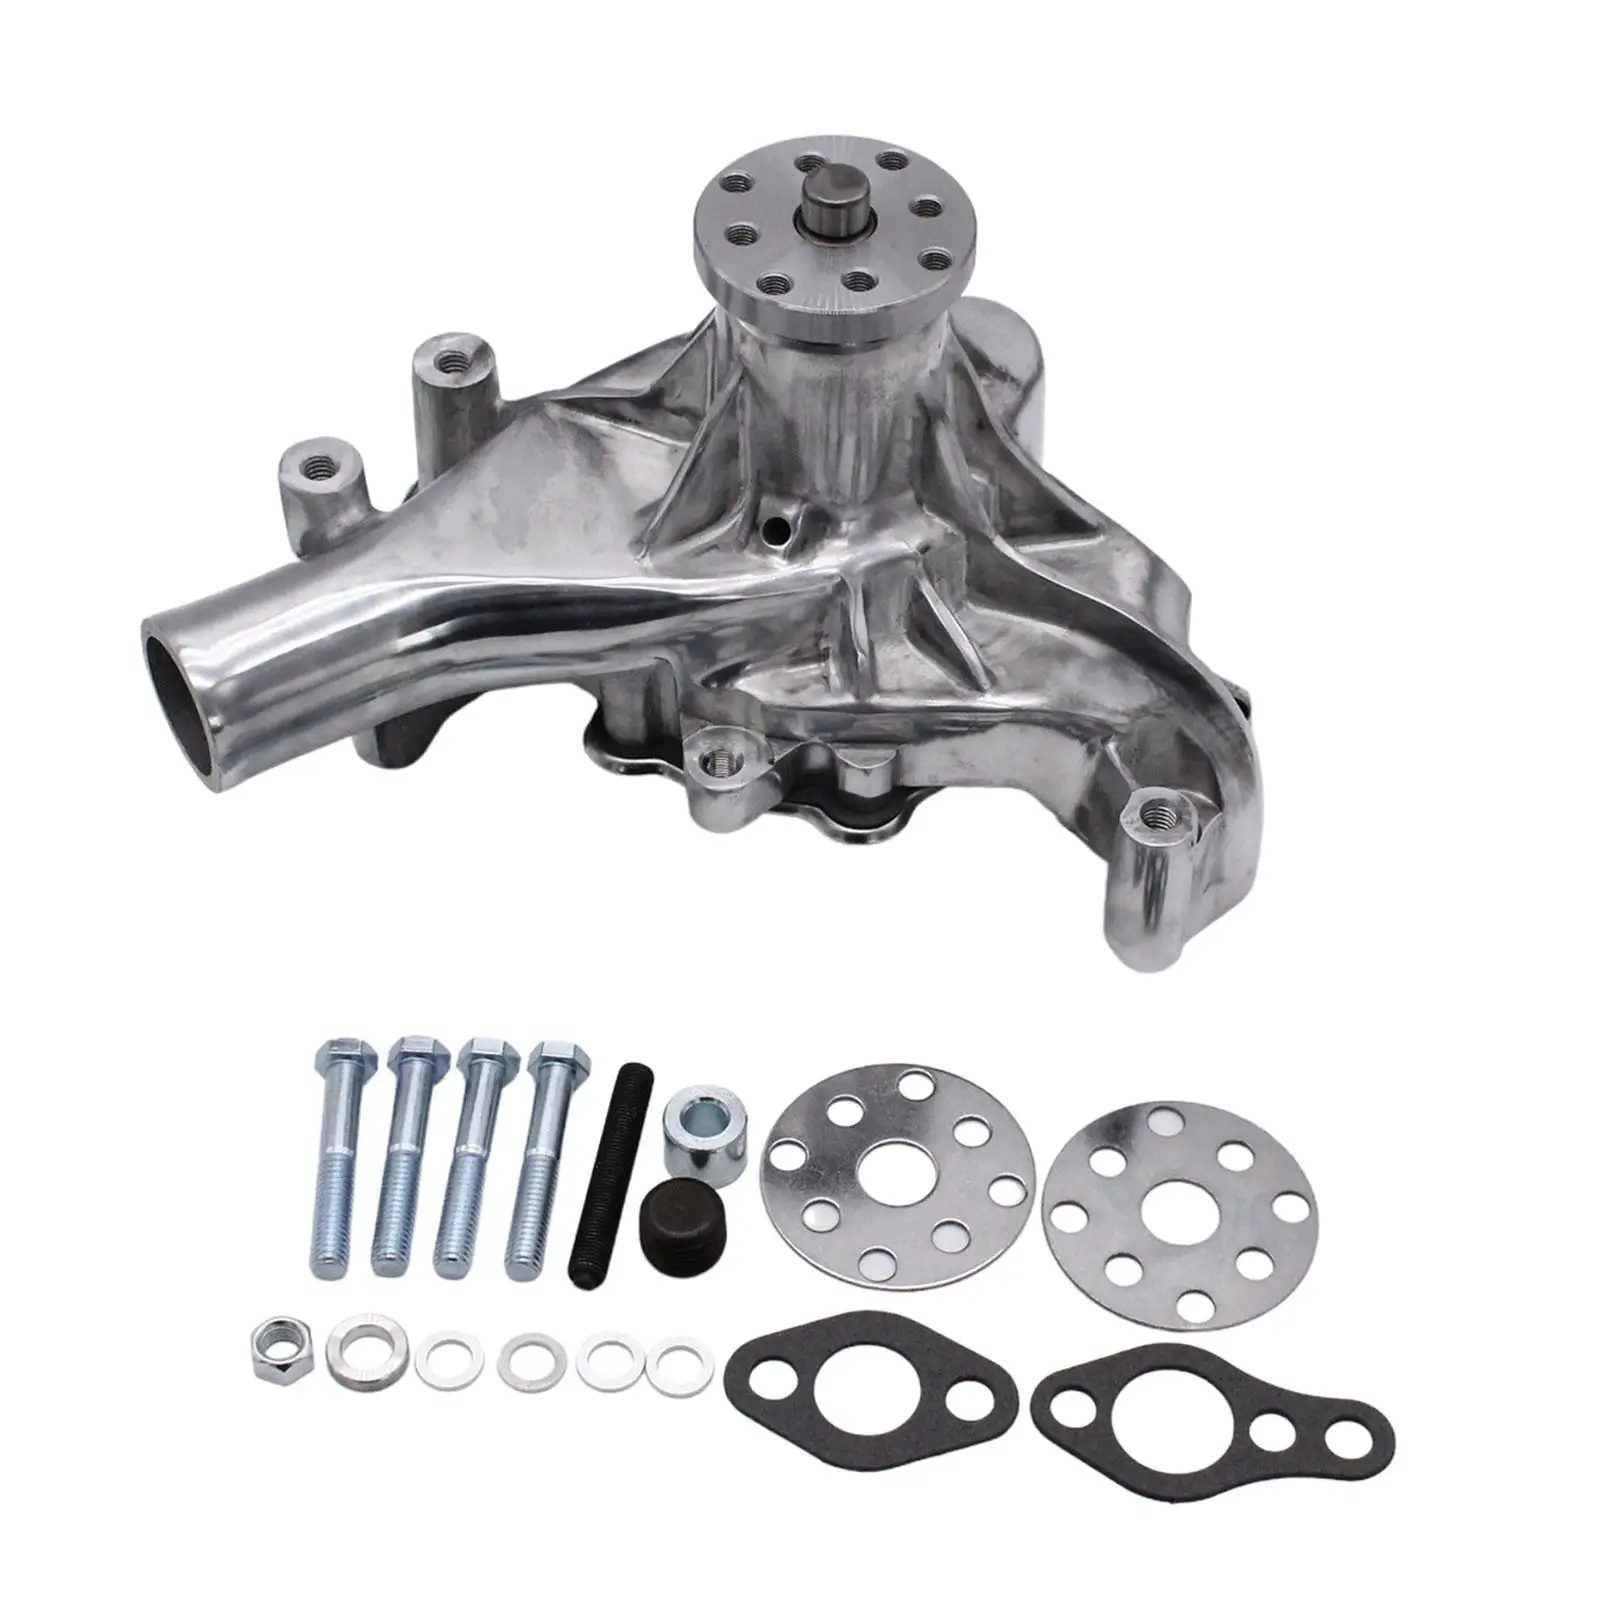 Water Pump Long Chrome Replacement Easily Install Stable Performance Polished Fittings Automobile High Volume for Chevy Sbc